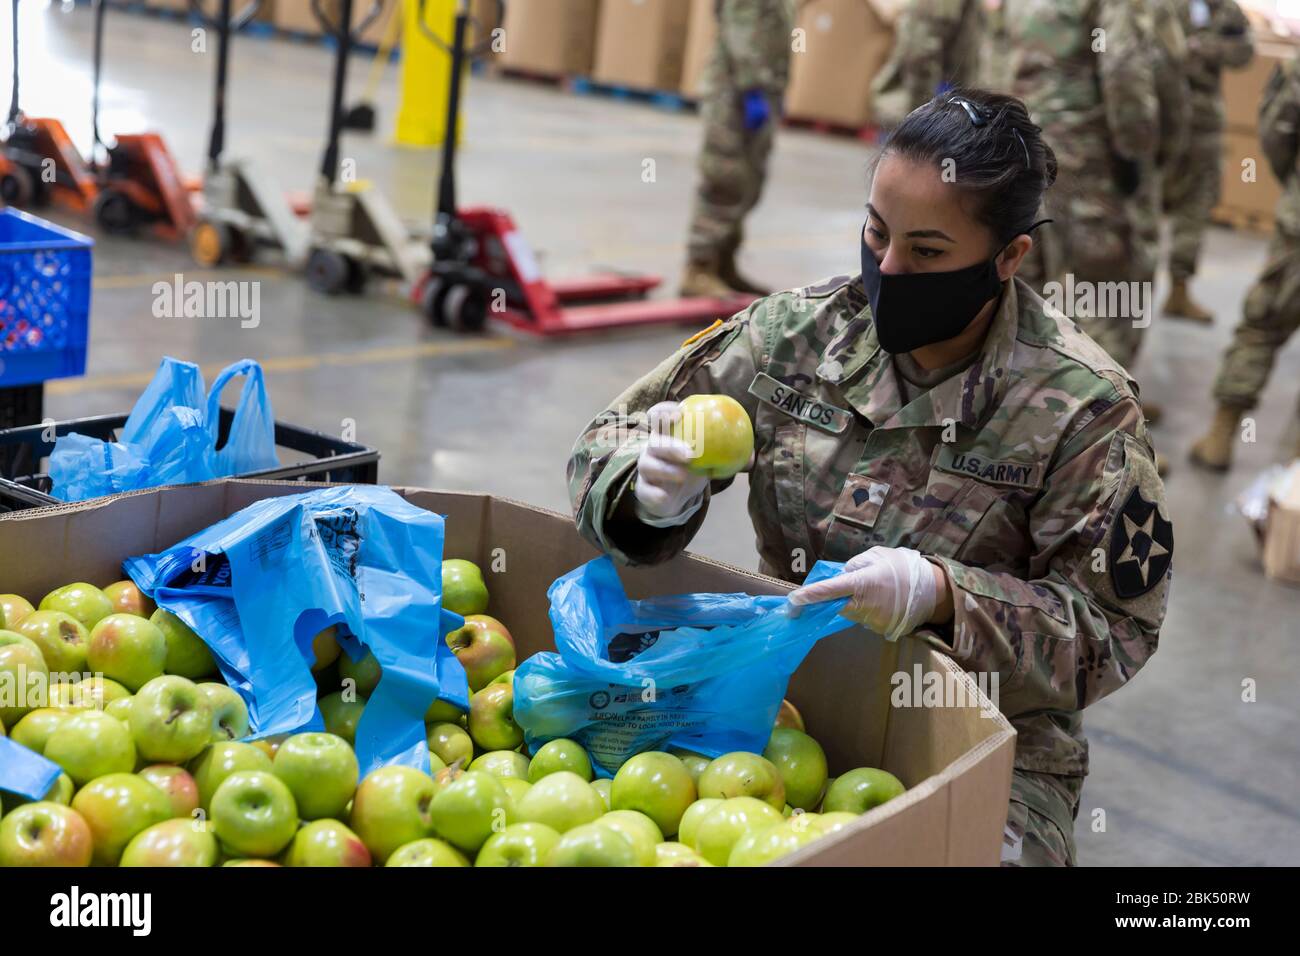 Richelle Santos, a member of the Washington Army National Guard, examines apples for distribution at the Food Lifeline Covid-19 Response Food Bank in Seattle on May 1, 2020. Food Lifeline, along with SSA Marine, Columbia Hospitality and Prologis, with assistance from the Washington Army and Air Force National Guard, created a supplemental 160,000 square-foot food bank in response to increasing food relief demand in the region amid the COVID-19 pandemic. Stock Photo